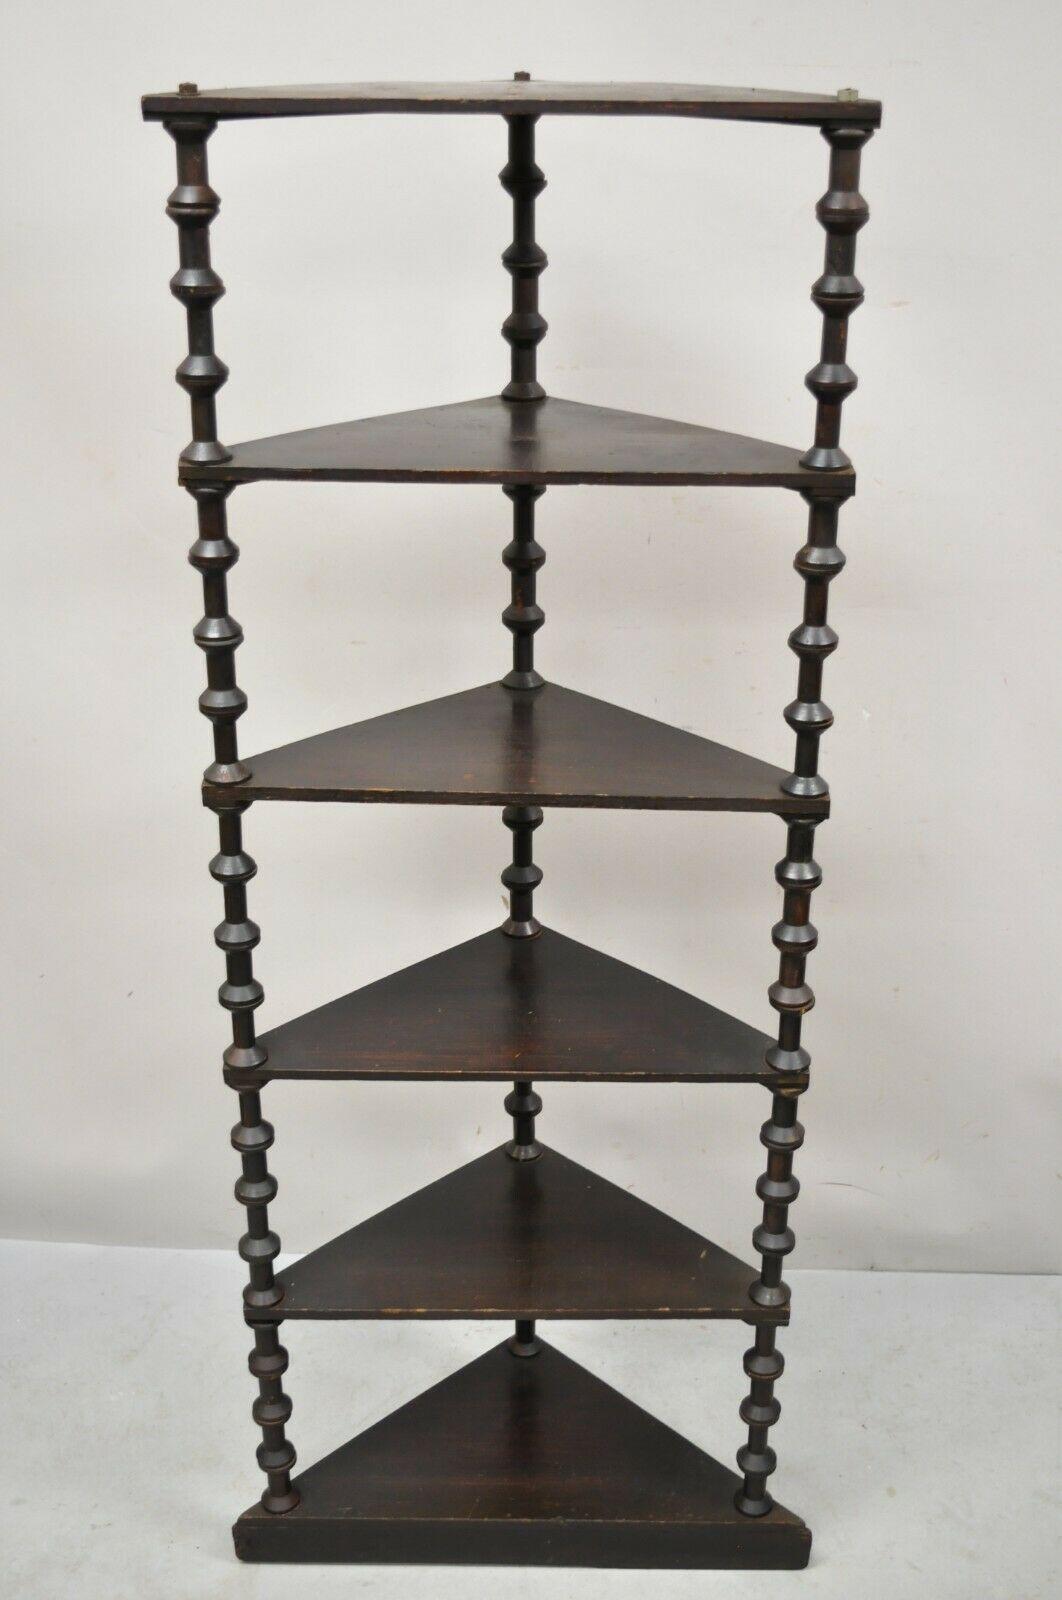 Antique folk art sewing spool carved 6 tier corner shelf whatnot stand. Item features beautiful wood grain, nicely carved details, very nice antique item, quality American craftsmanship. Circa Early 1900s. Measurements: 60